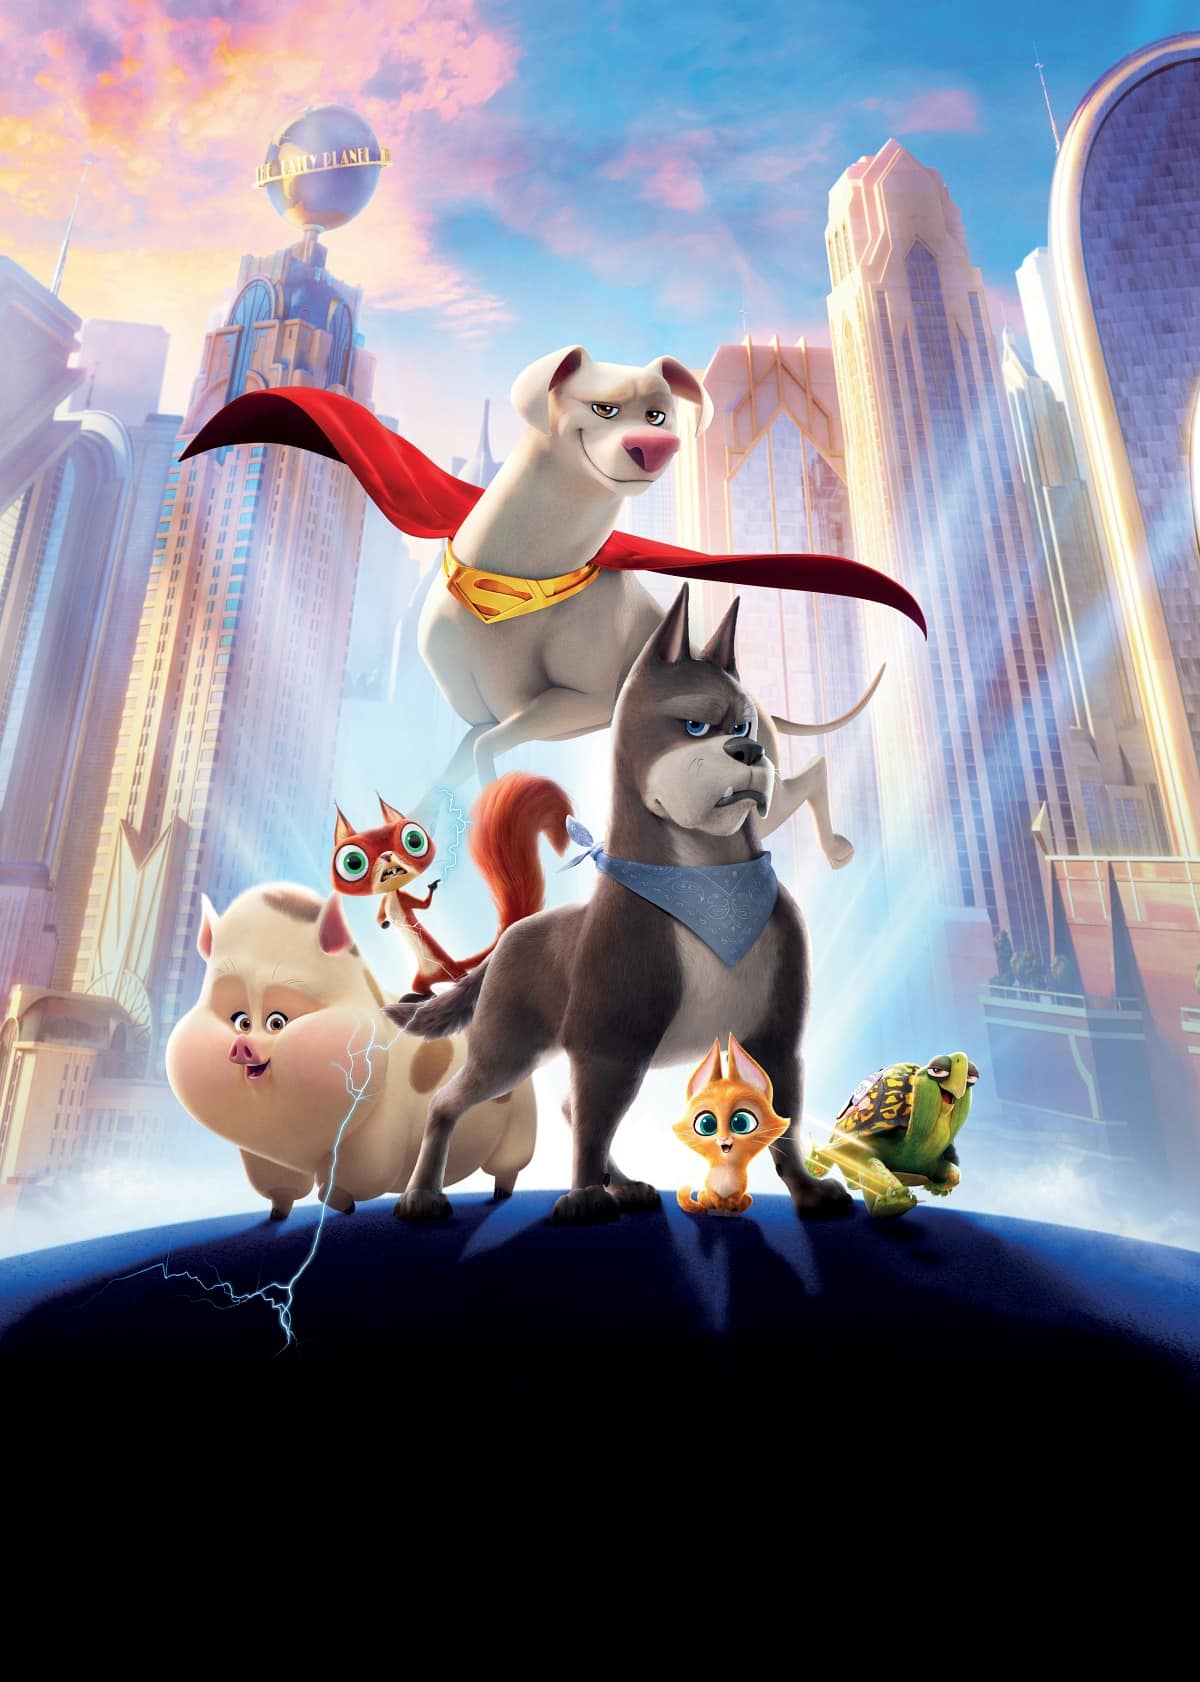 Promotional art for the 2022 3D computer-animated superhero comedy film DC League of Super-Pets